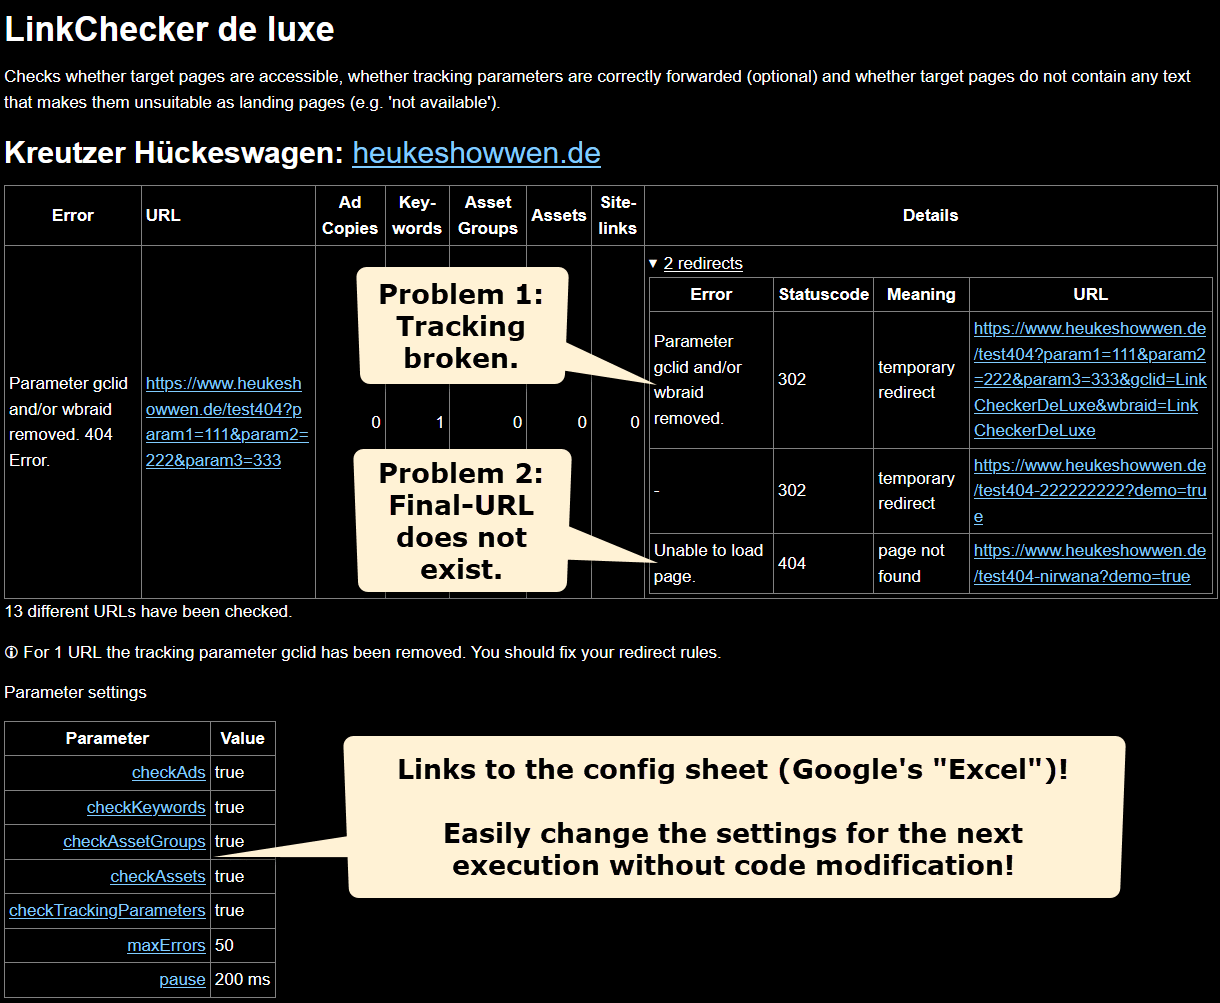 Google Ads Script <nw>Link Checker de luxe</nw> Alarm Email